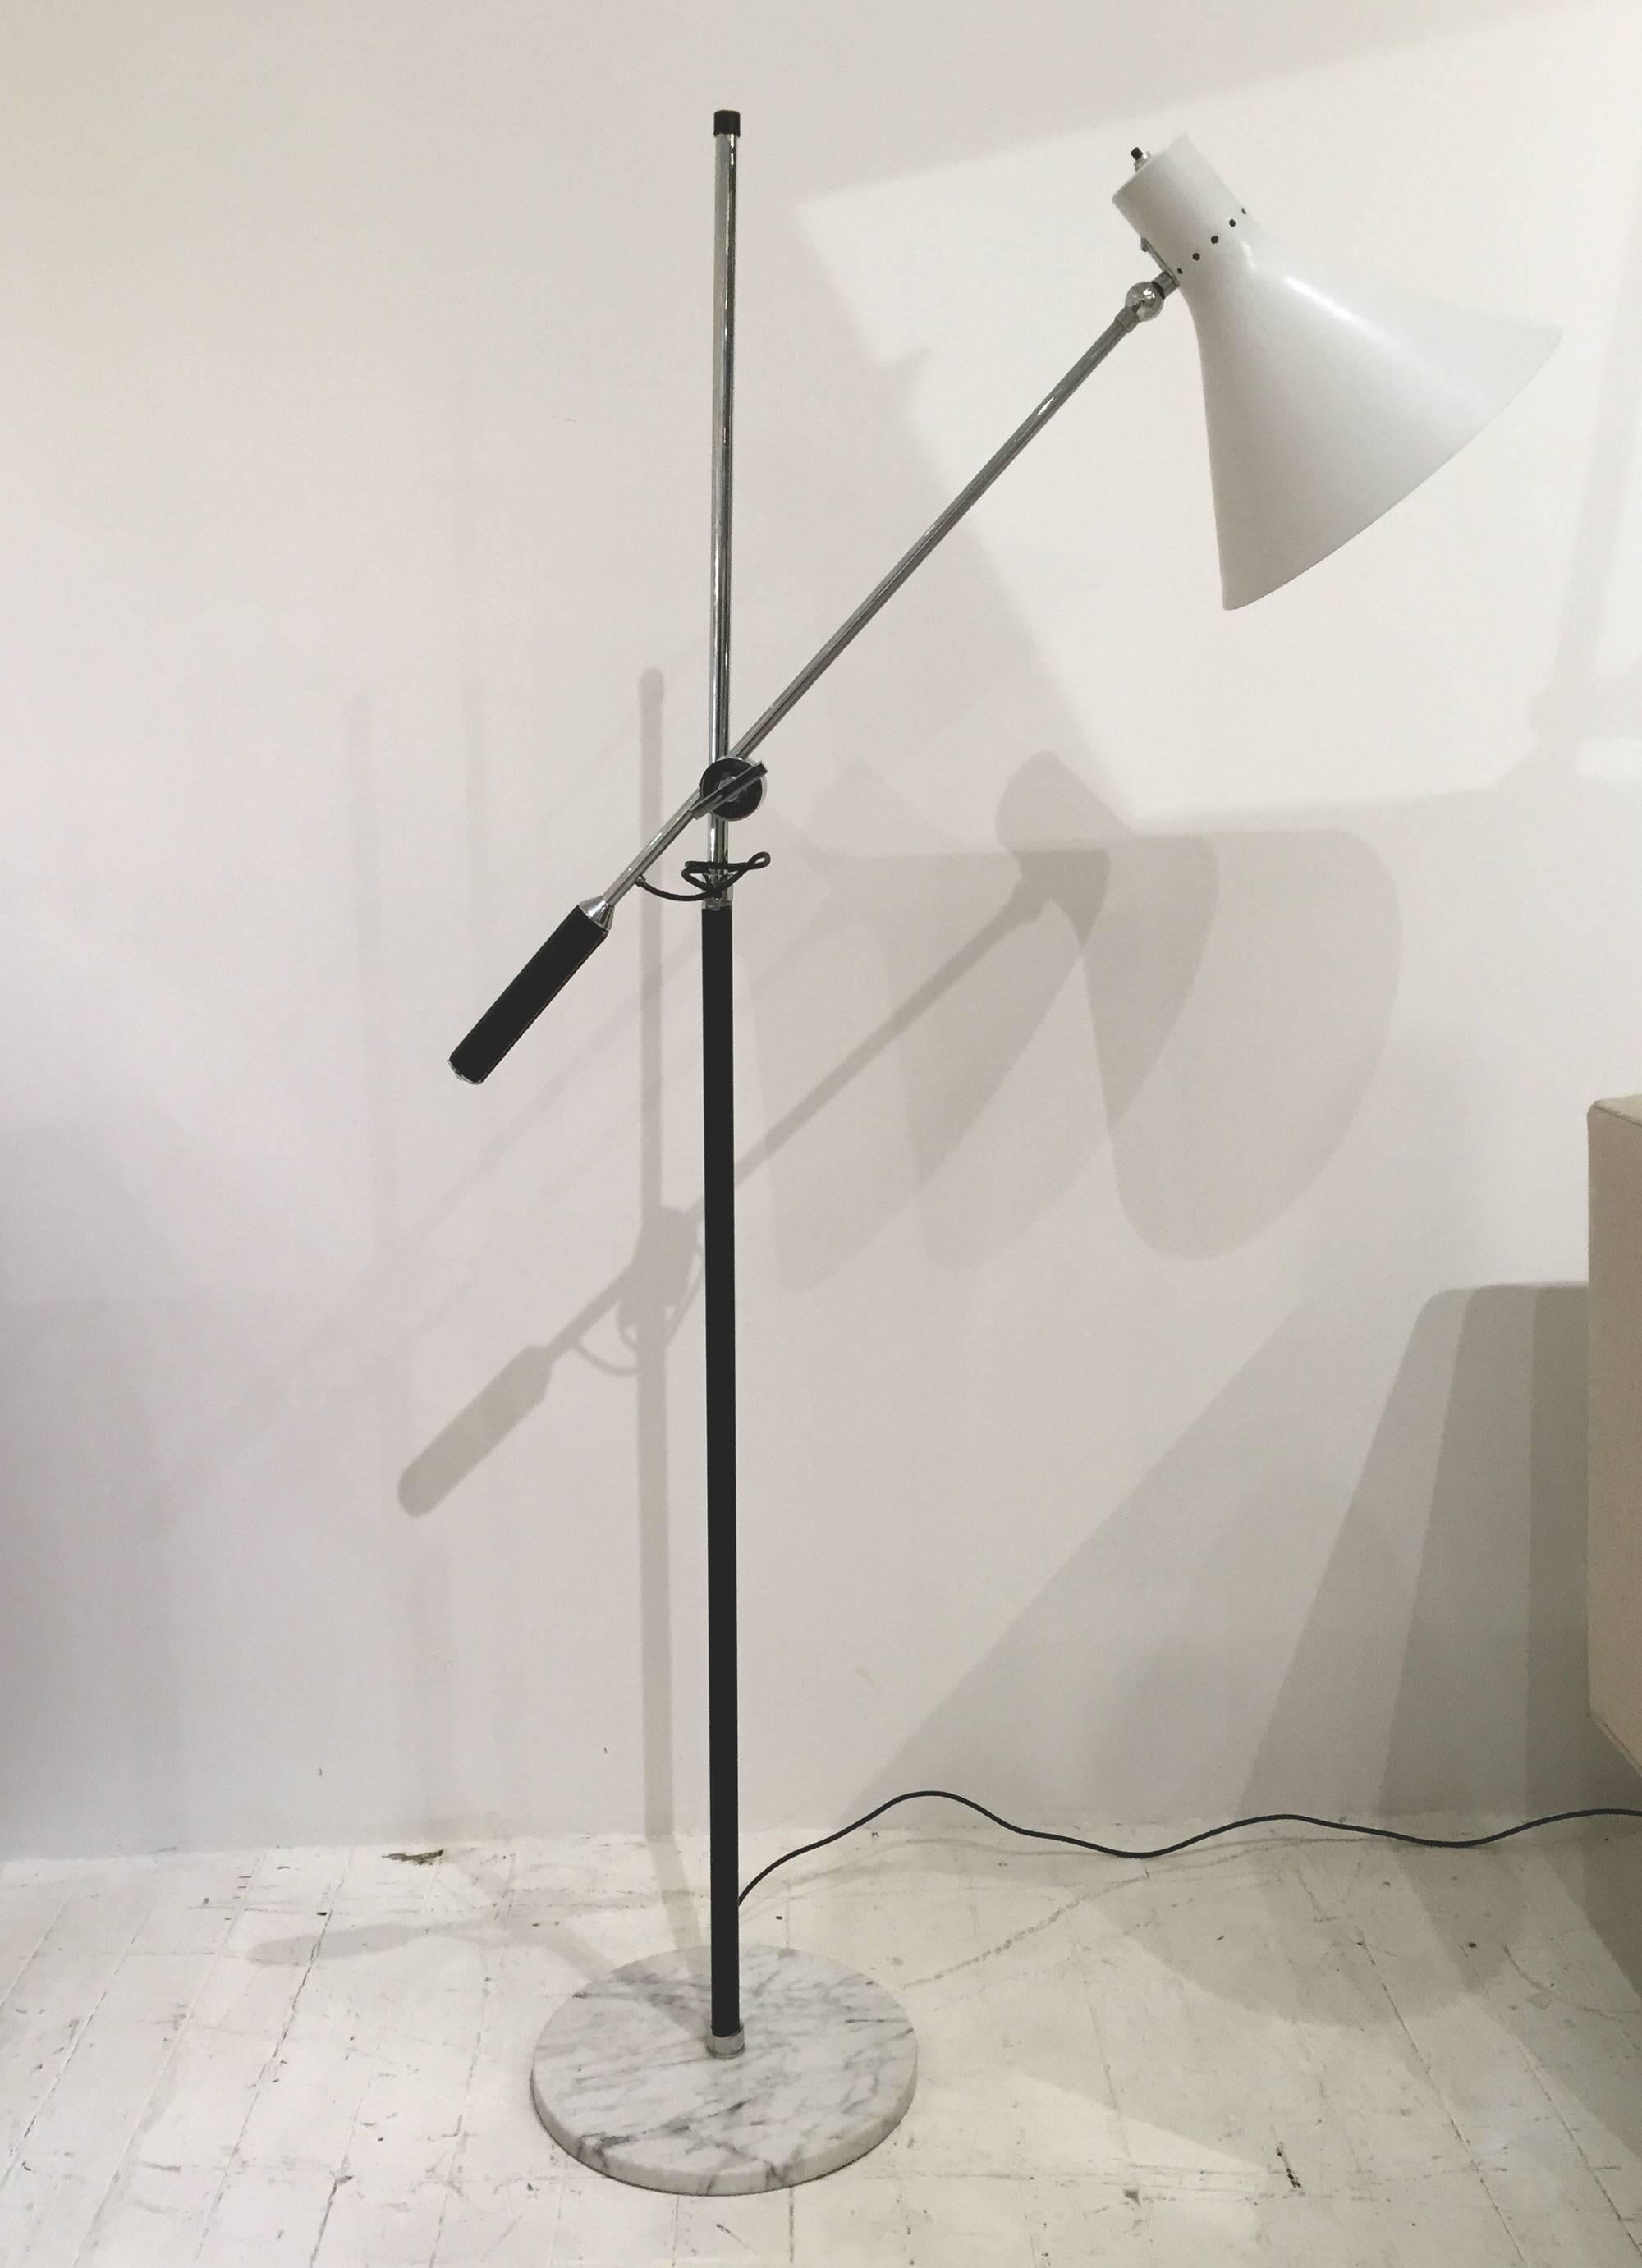 Articulating floor lamp by Arredoluce 1950s-1960s. 
Enameled metal, chrome, leather accent on handles and marble bases.
Two available. Can be sold as a pair or separately.

This item is currently on view in our NYC Greenwich Street Location.